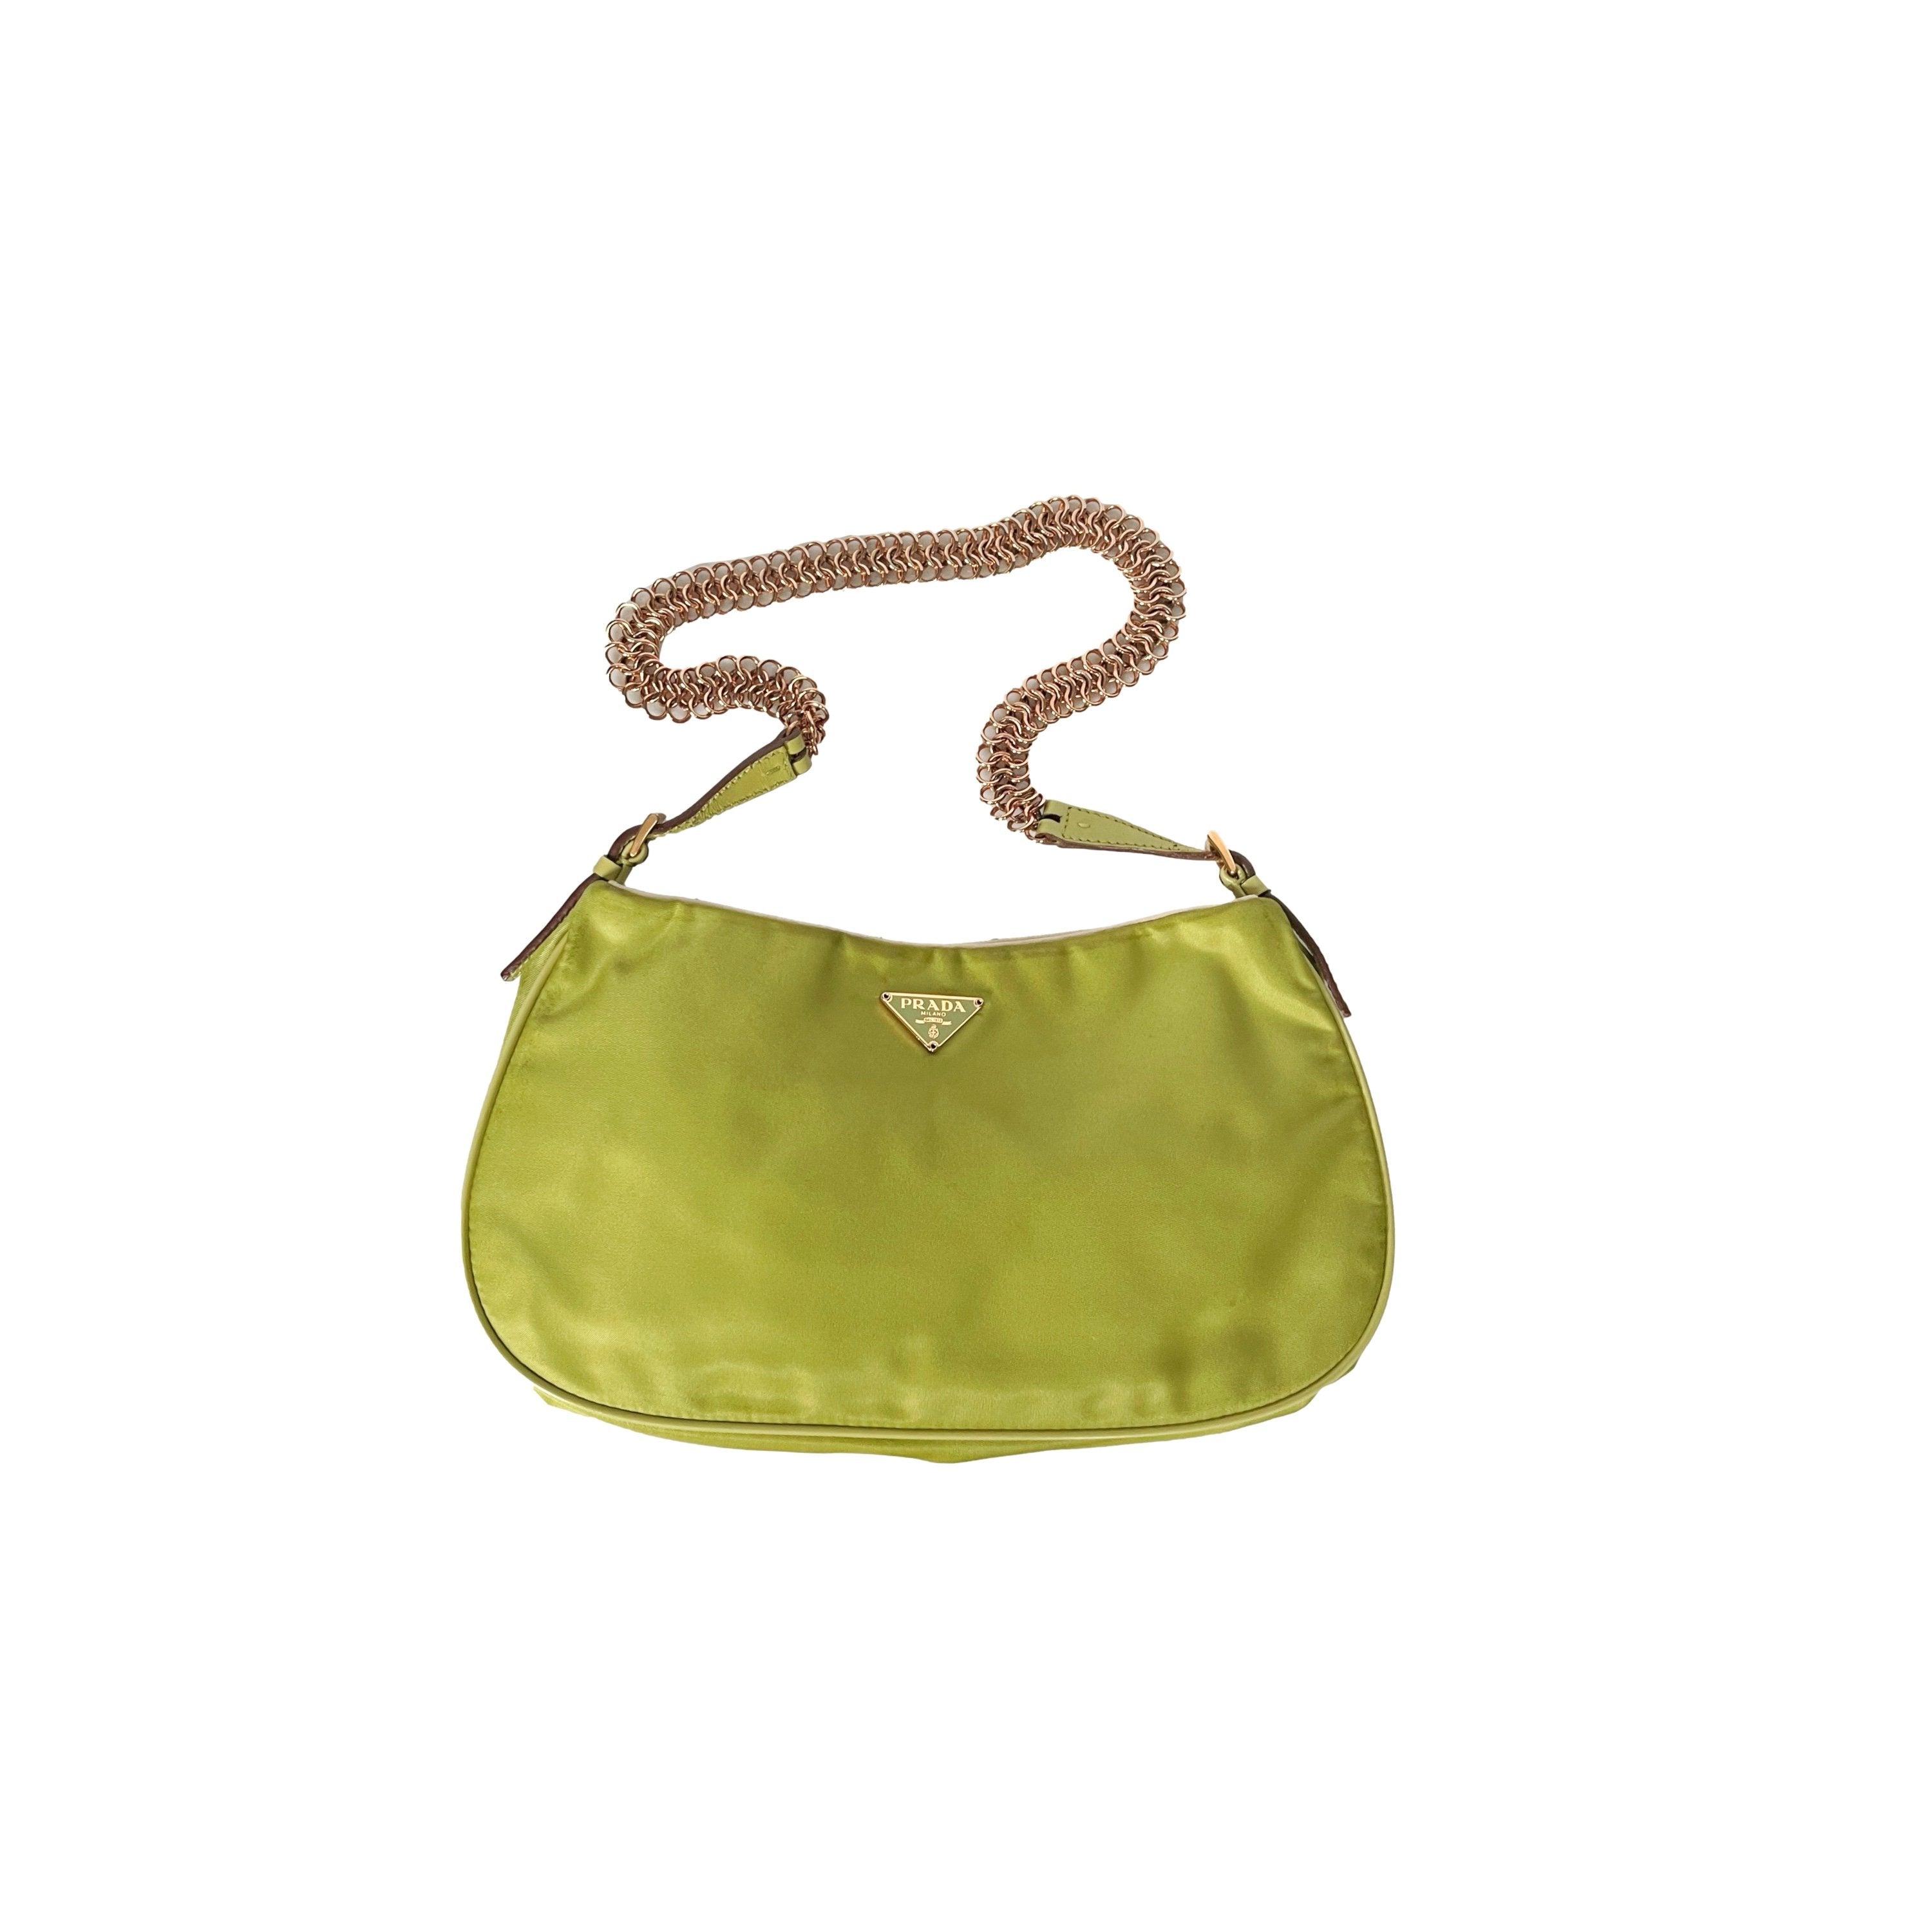 Sold at Auction: Prada Chain Shoulder Bag, in lime green nylon